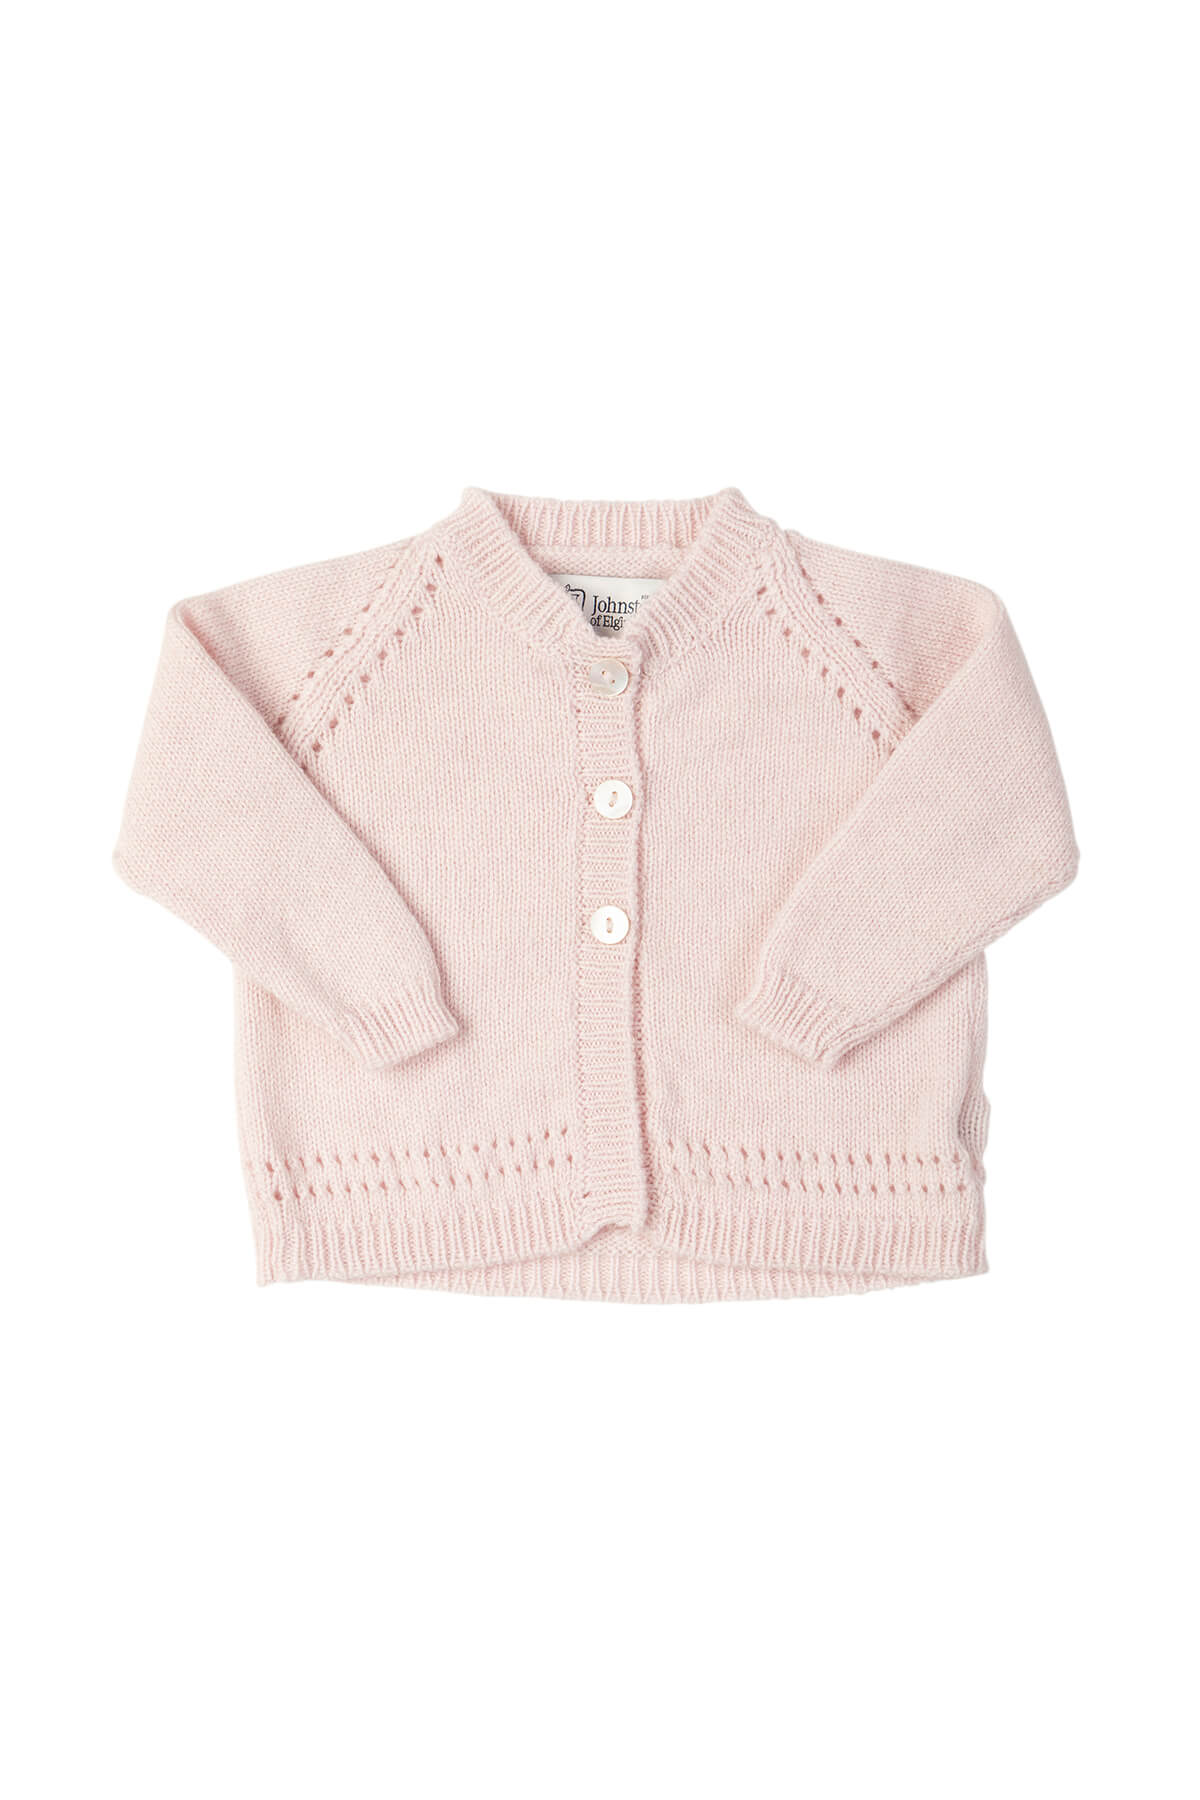 Johnstons of Elgin’s Baby's 1st Cashmere Cardigan in Blush Pink on a white background AW21GIFTSET19B